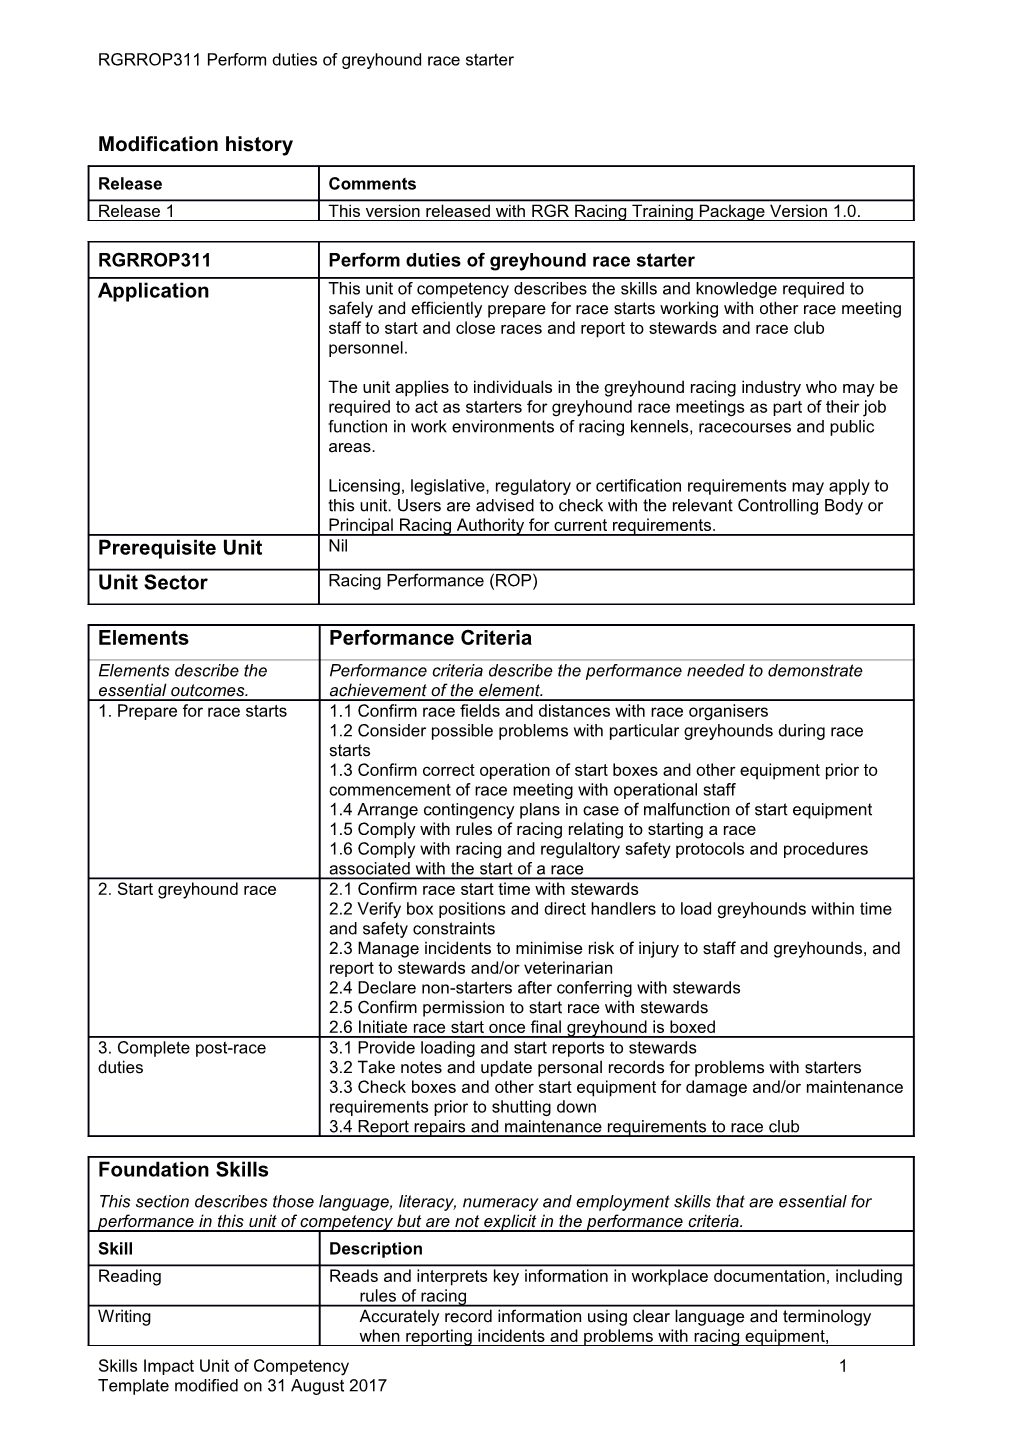 Skills Impact Unit of Competency Template s1